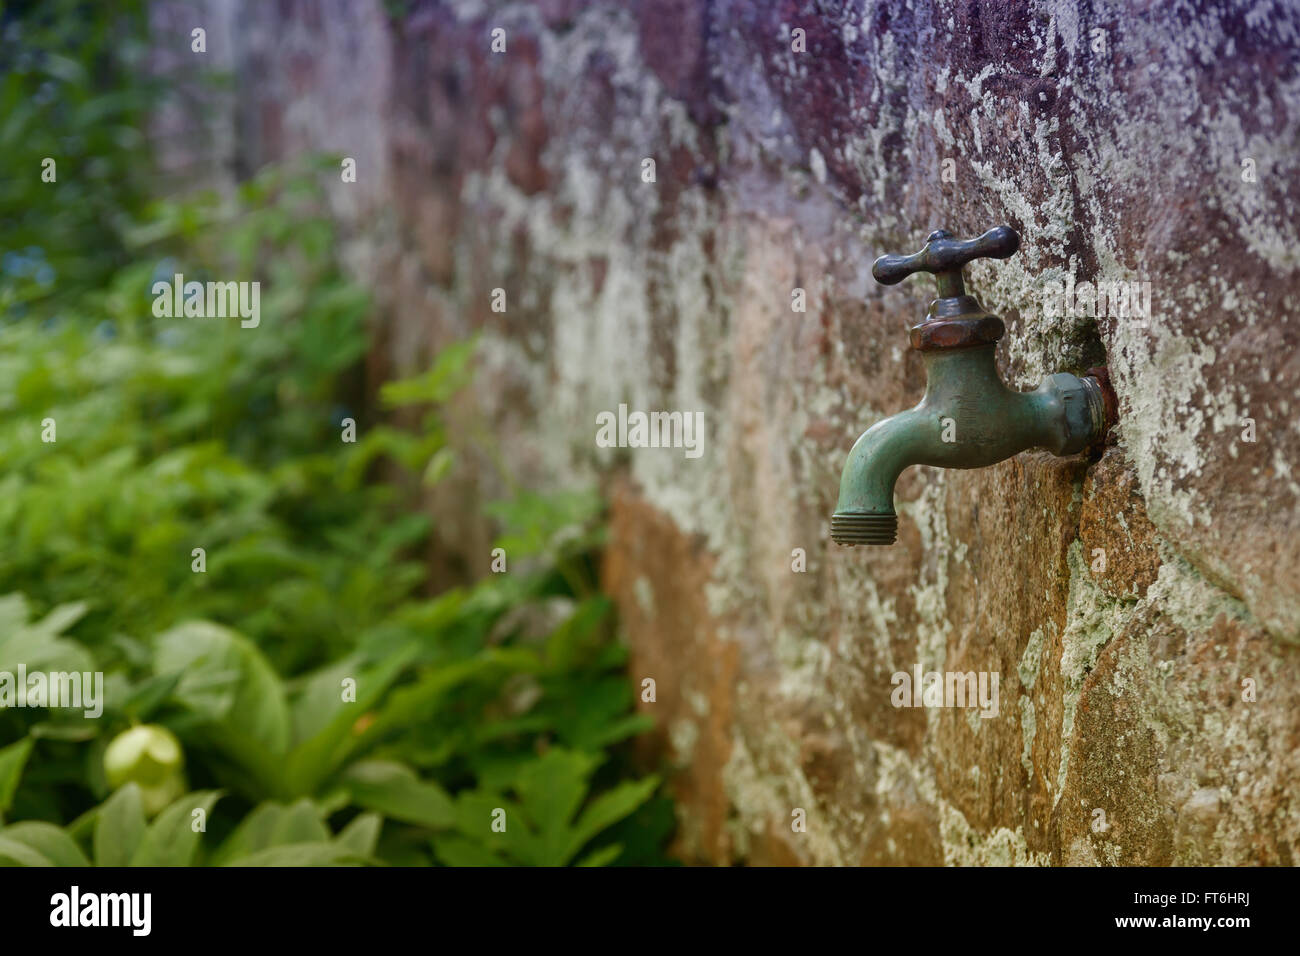 Old garden faucet or tap gardening concept with copy space and vintage style filter applied to image Stock Photo